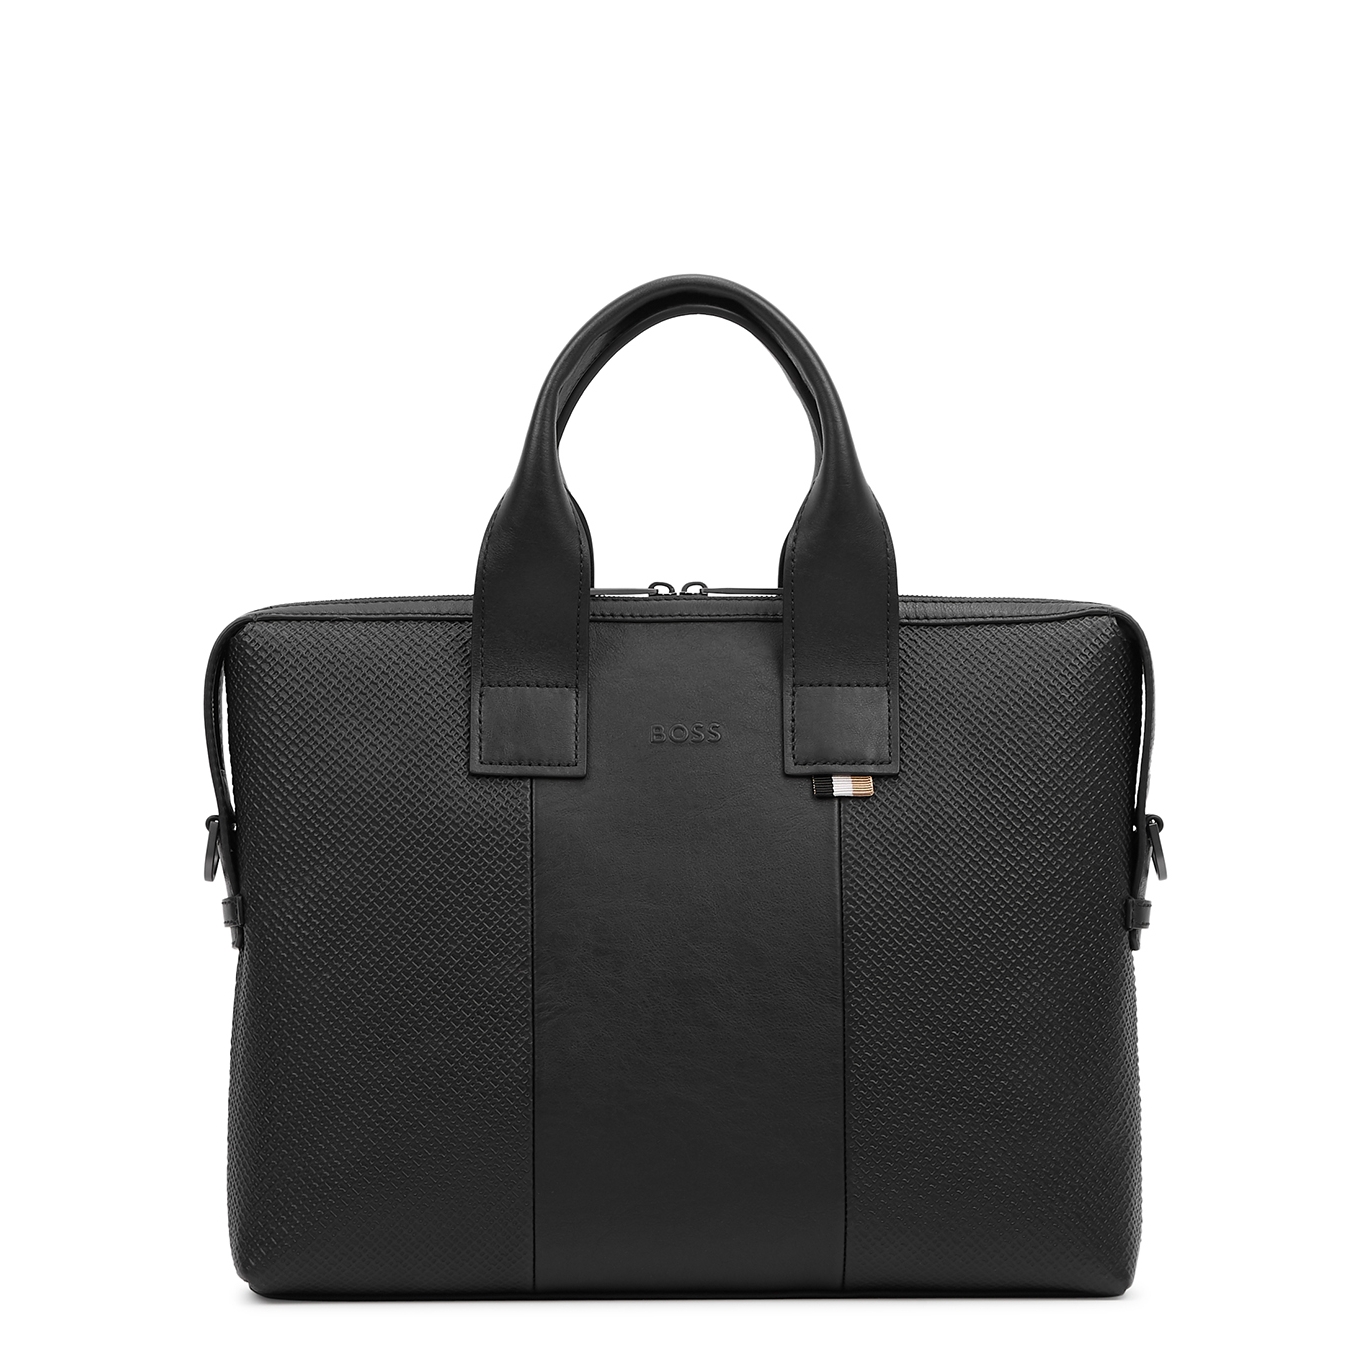 Boss Black Monogrammed Leather Briefcase, Briefcase, Black, Leather